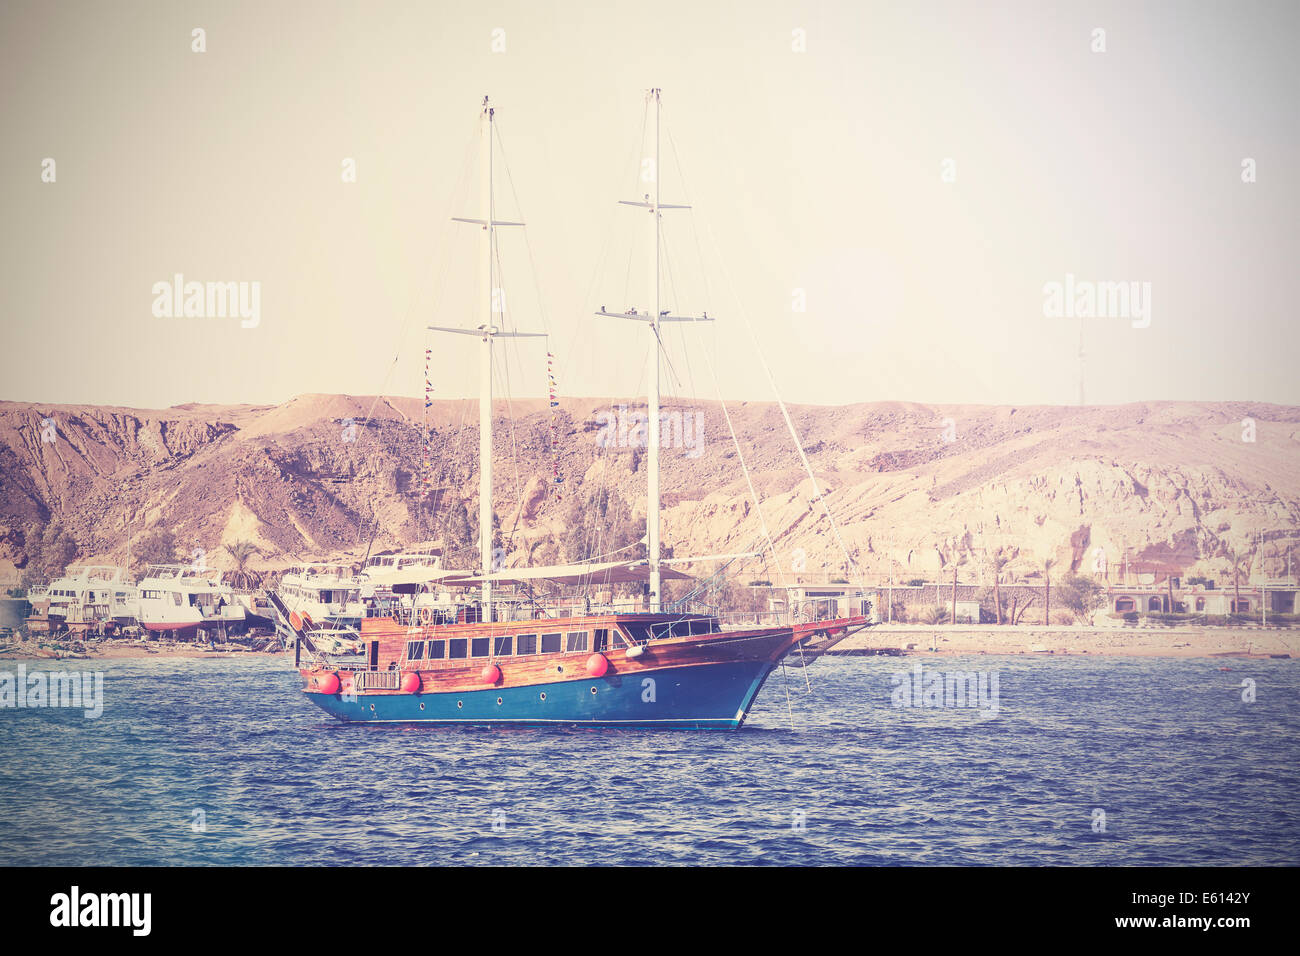 Vintage picture of a sailing boat on the sea in Egypt. Stock Photo